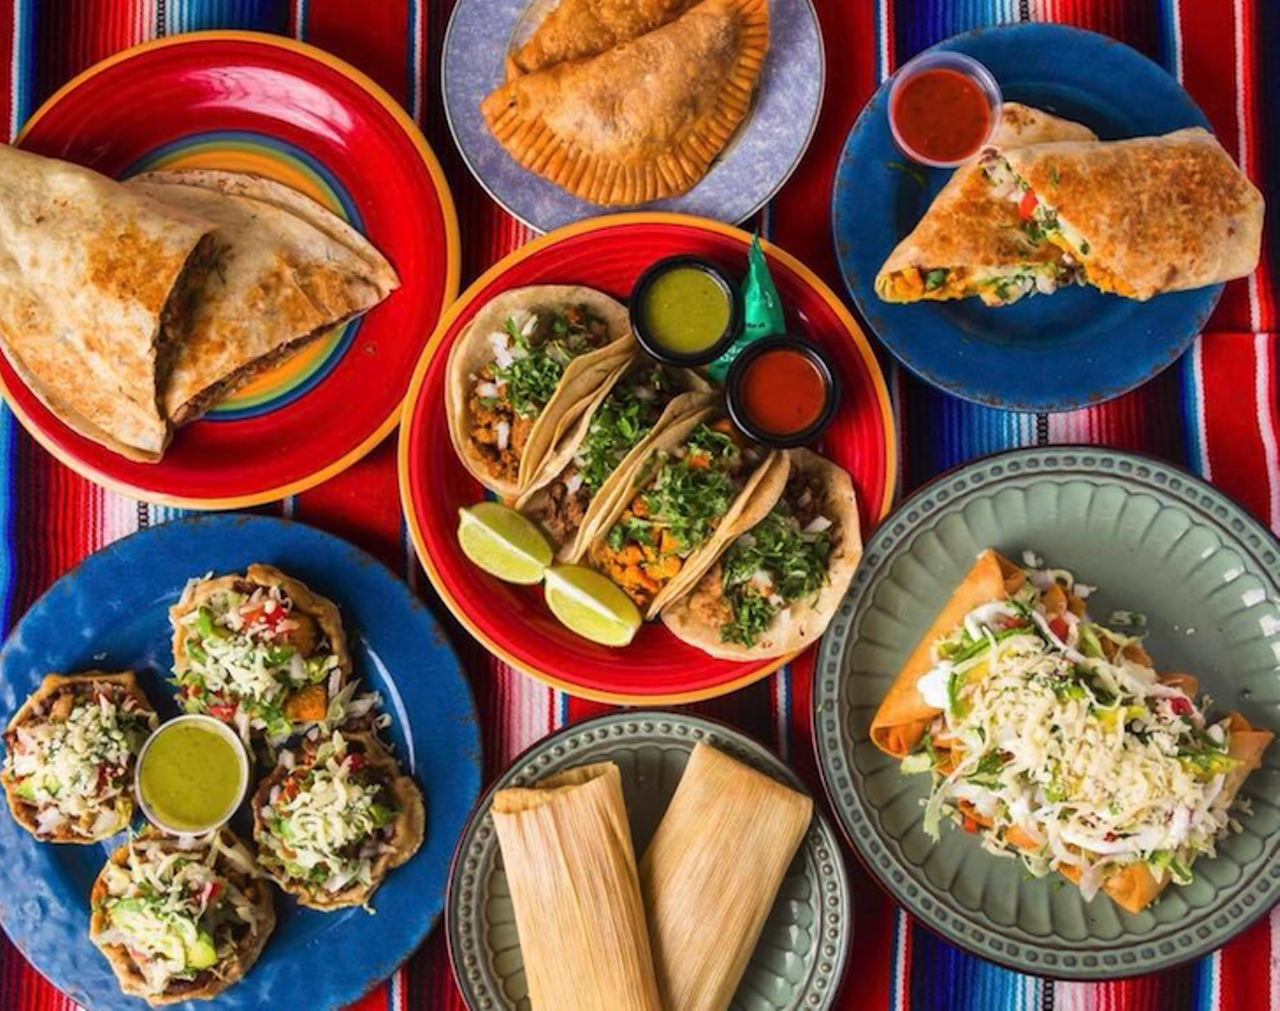 Anojitos Mexicano   
6118 S Dale Marby Hwy, Tampa, 813- 417-6851
Another bomb street taco joint. You&#146;ll want the traditional carnitas tacos. They call themselves &#147;Tampa&#146;s not so hidden gem.&#148;
Photo via Anijotis Mexicano /Facebook